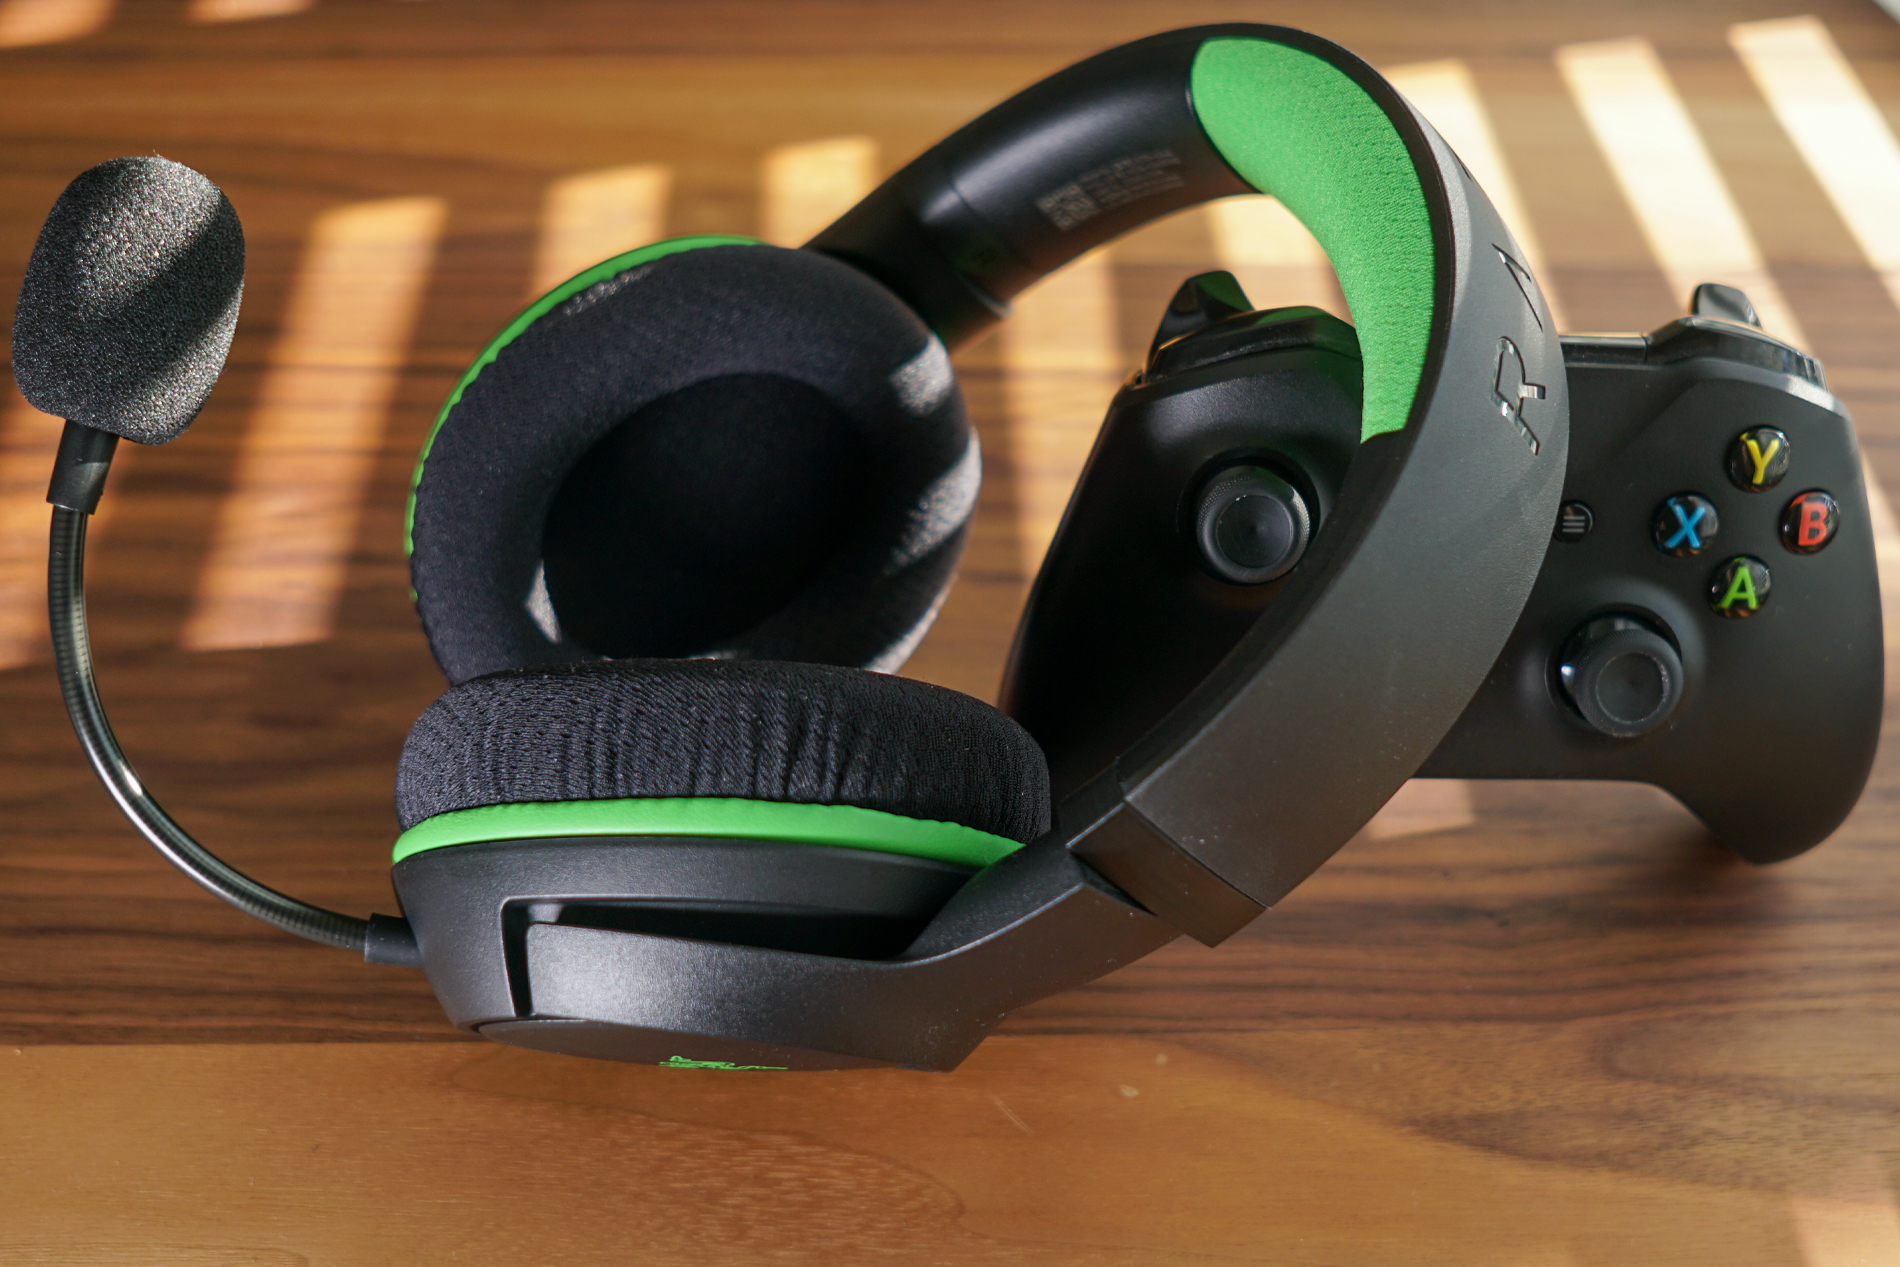 The Razer Kaira Wireless leans on an Xbox One controller on a wooden table near a window with the blinds drawn